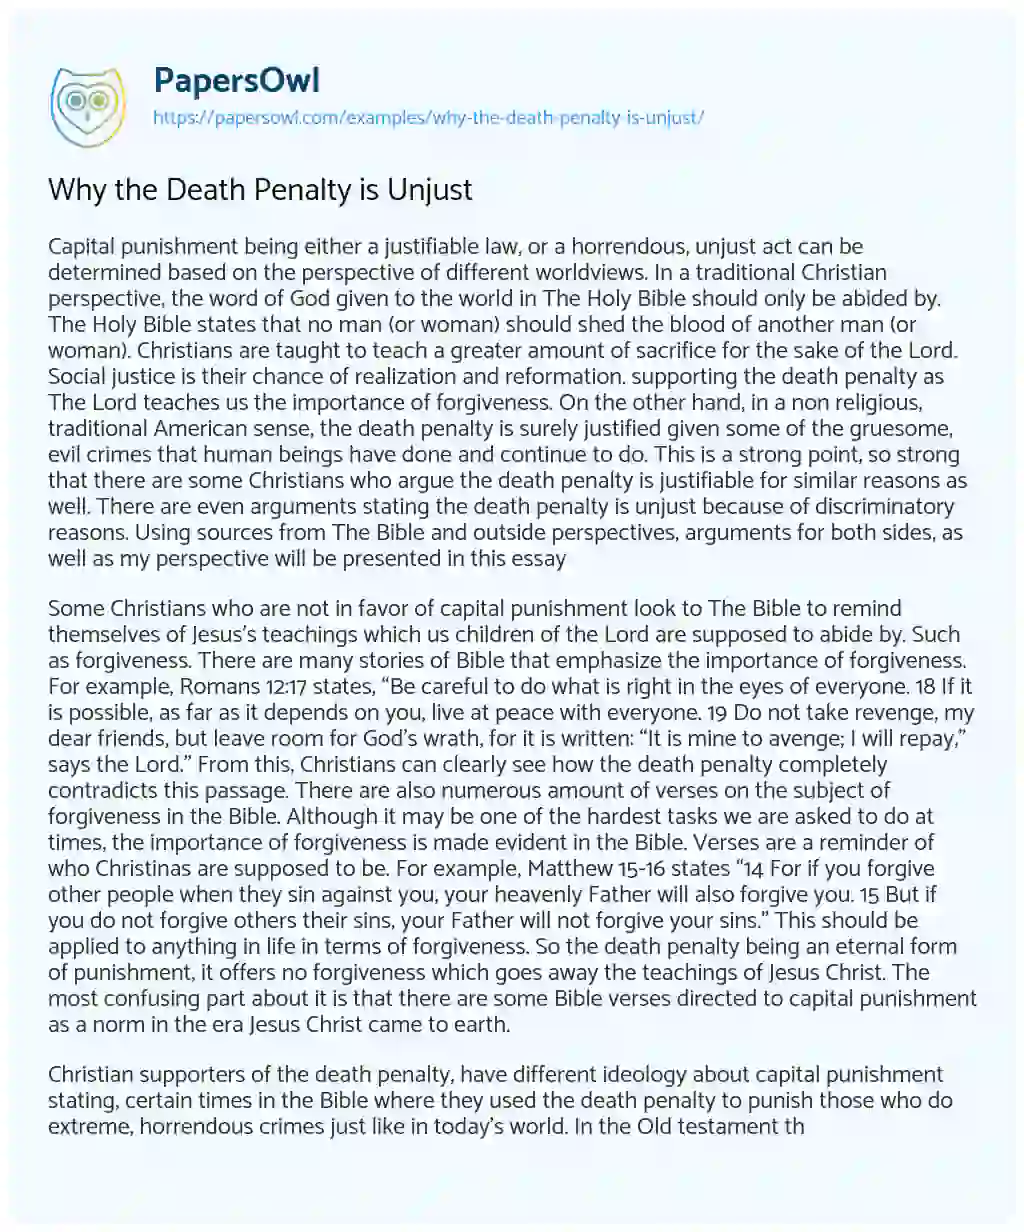 Essay on Why the Death Penalty is Unjust